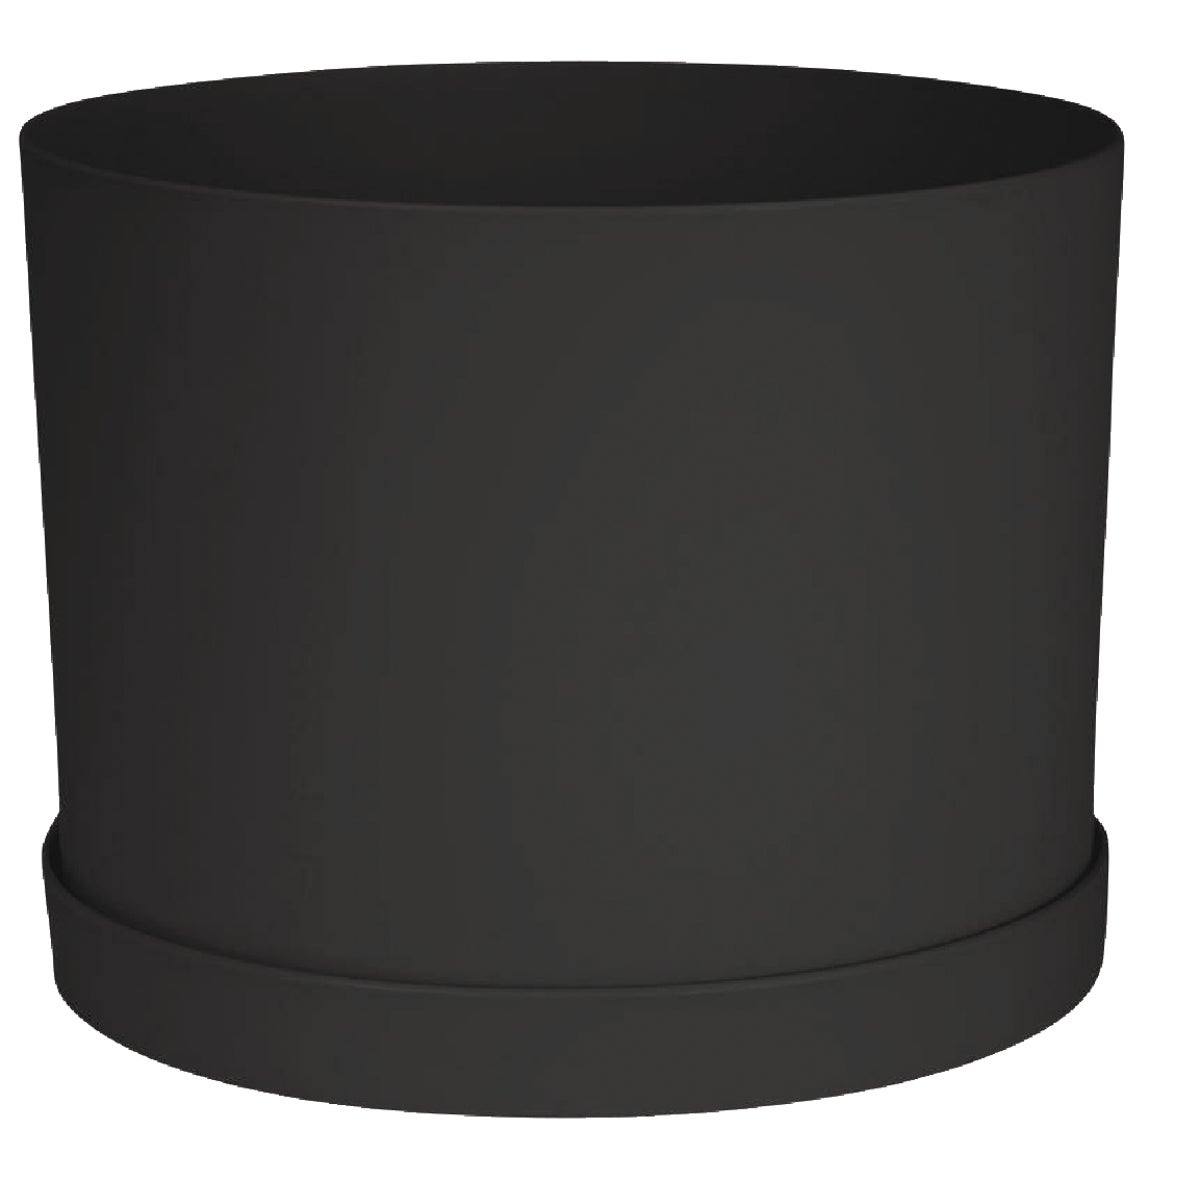 Bloem Mathers Collection 8 In. Black Plastic Planter